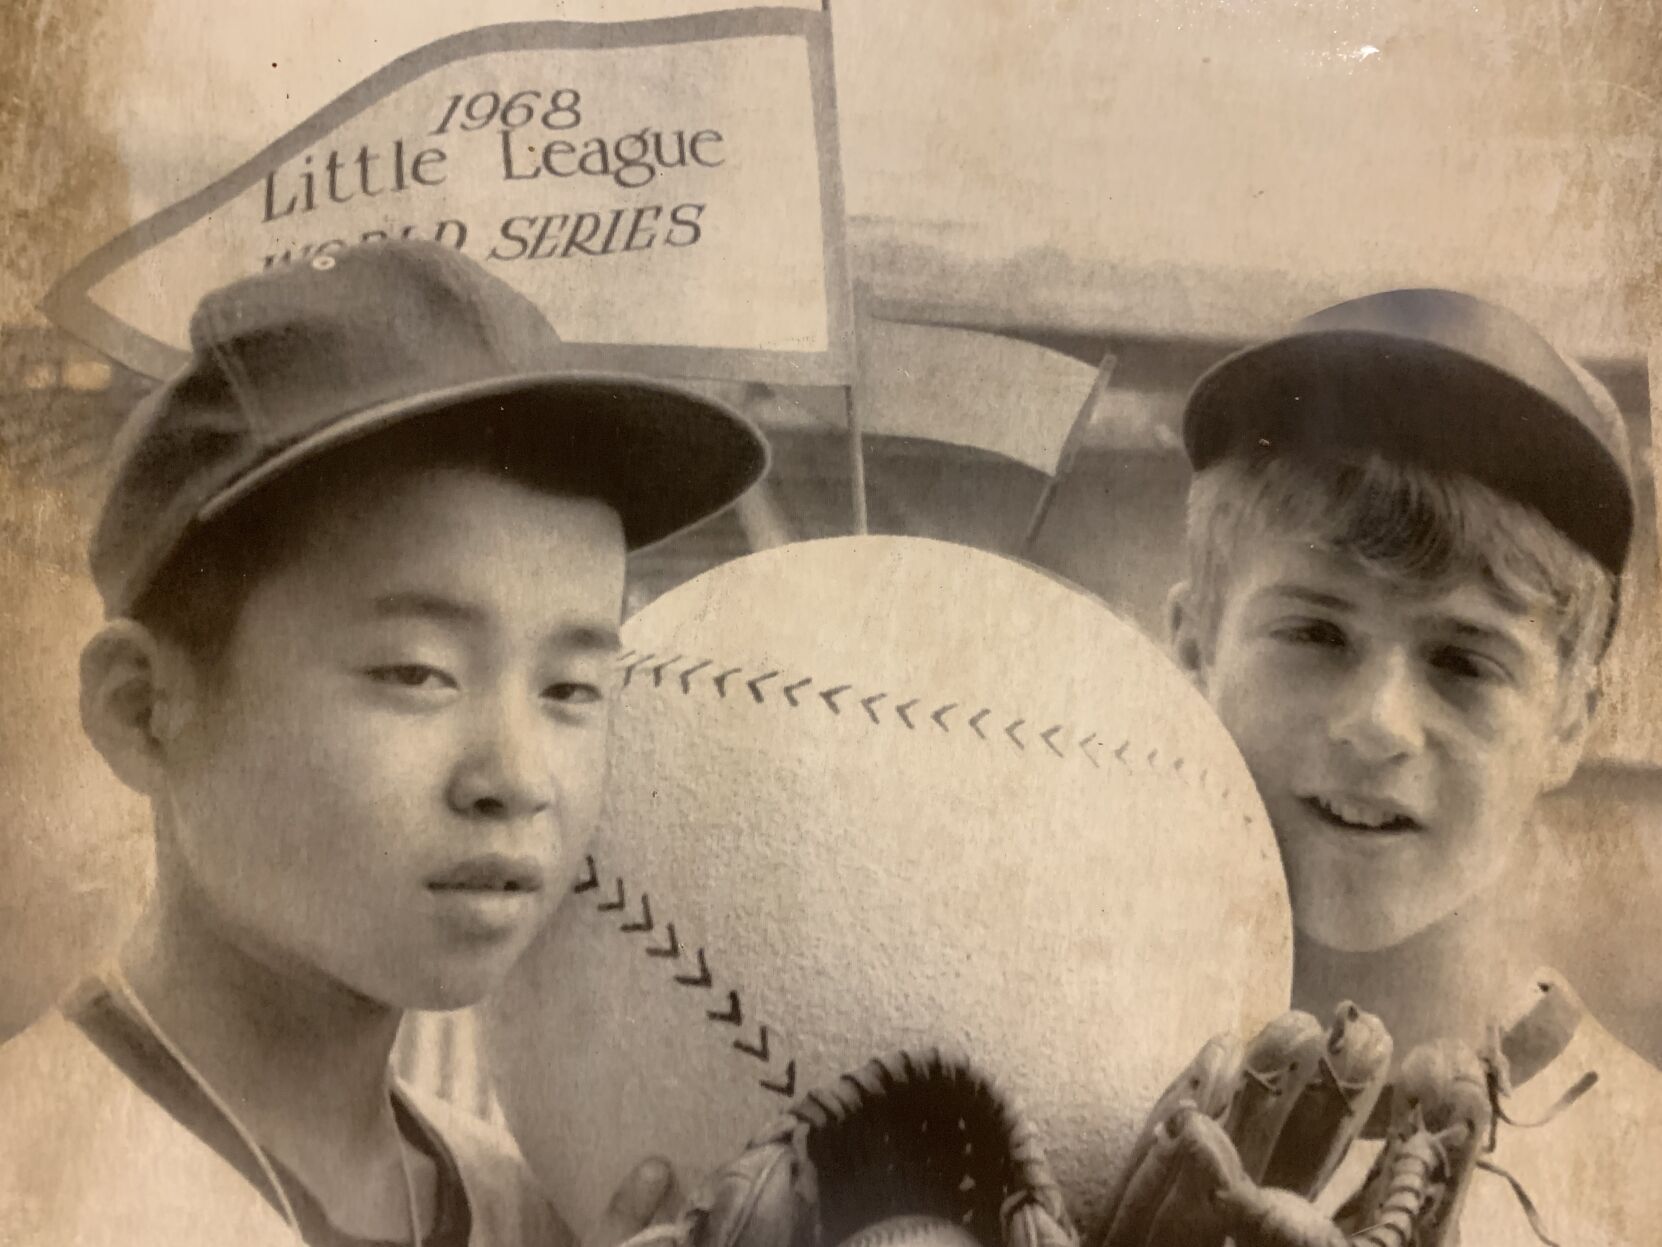 55 years ago, Tuckahoe played in Little League World Series photo